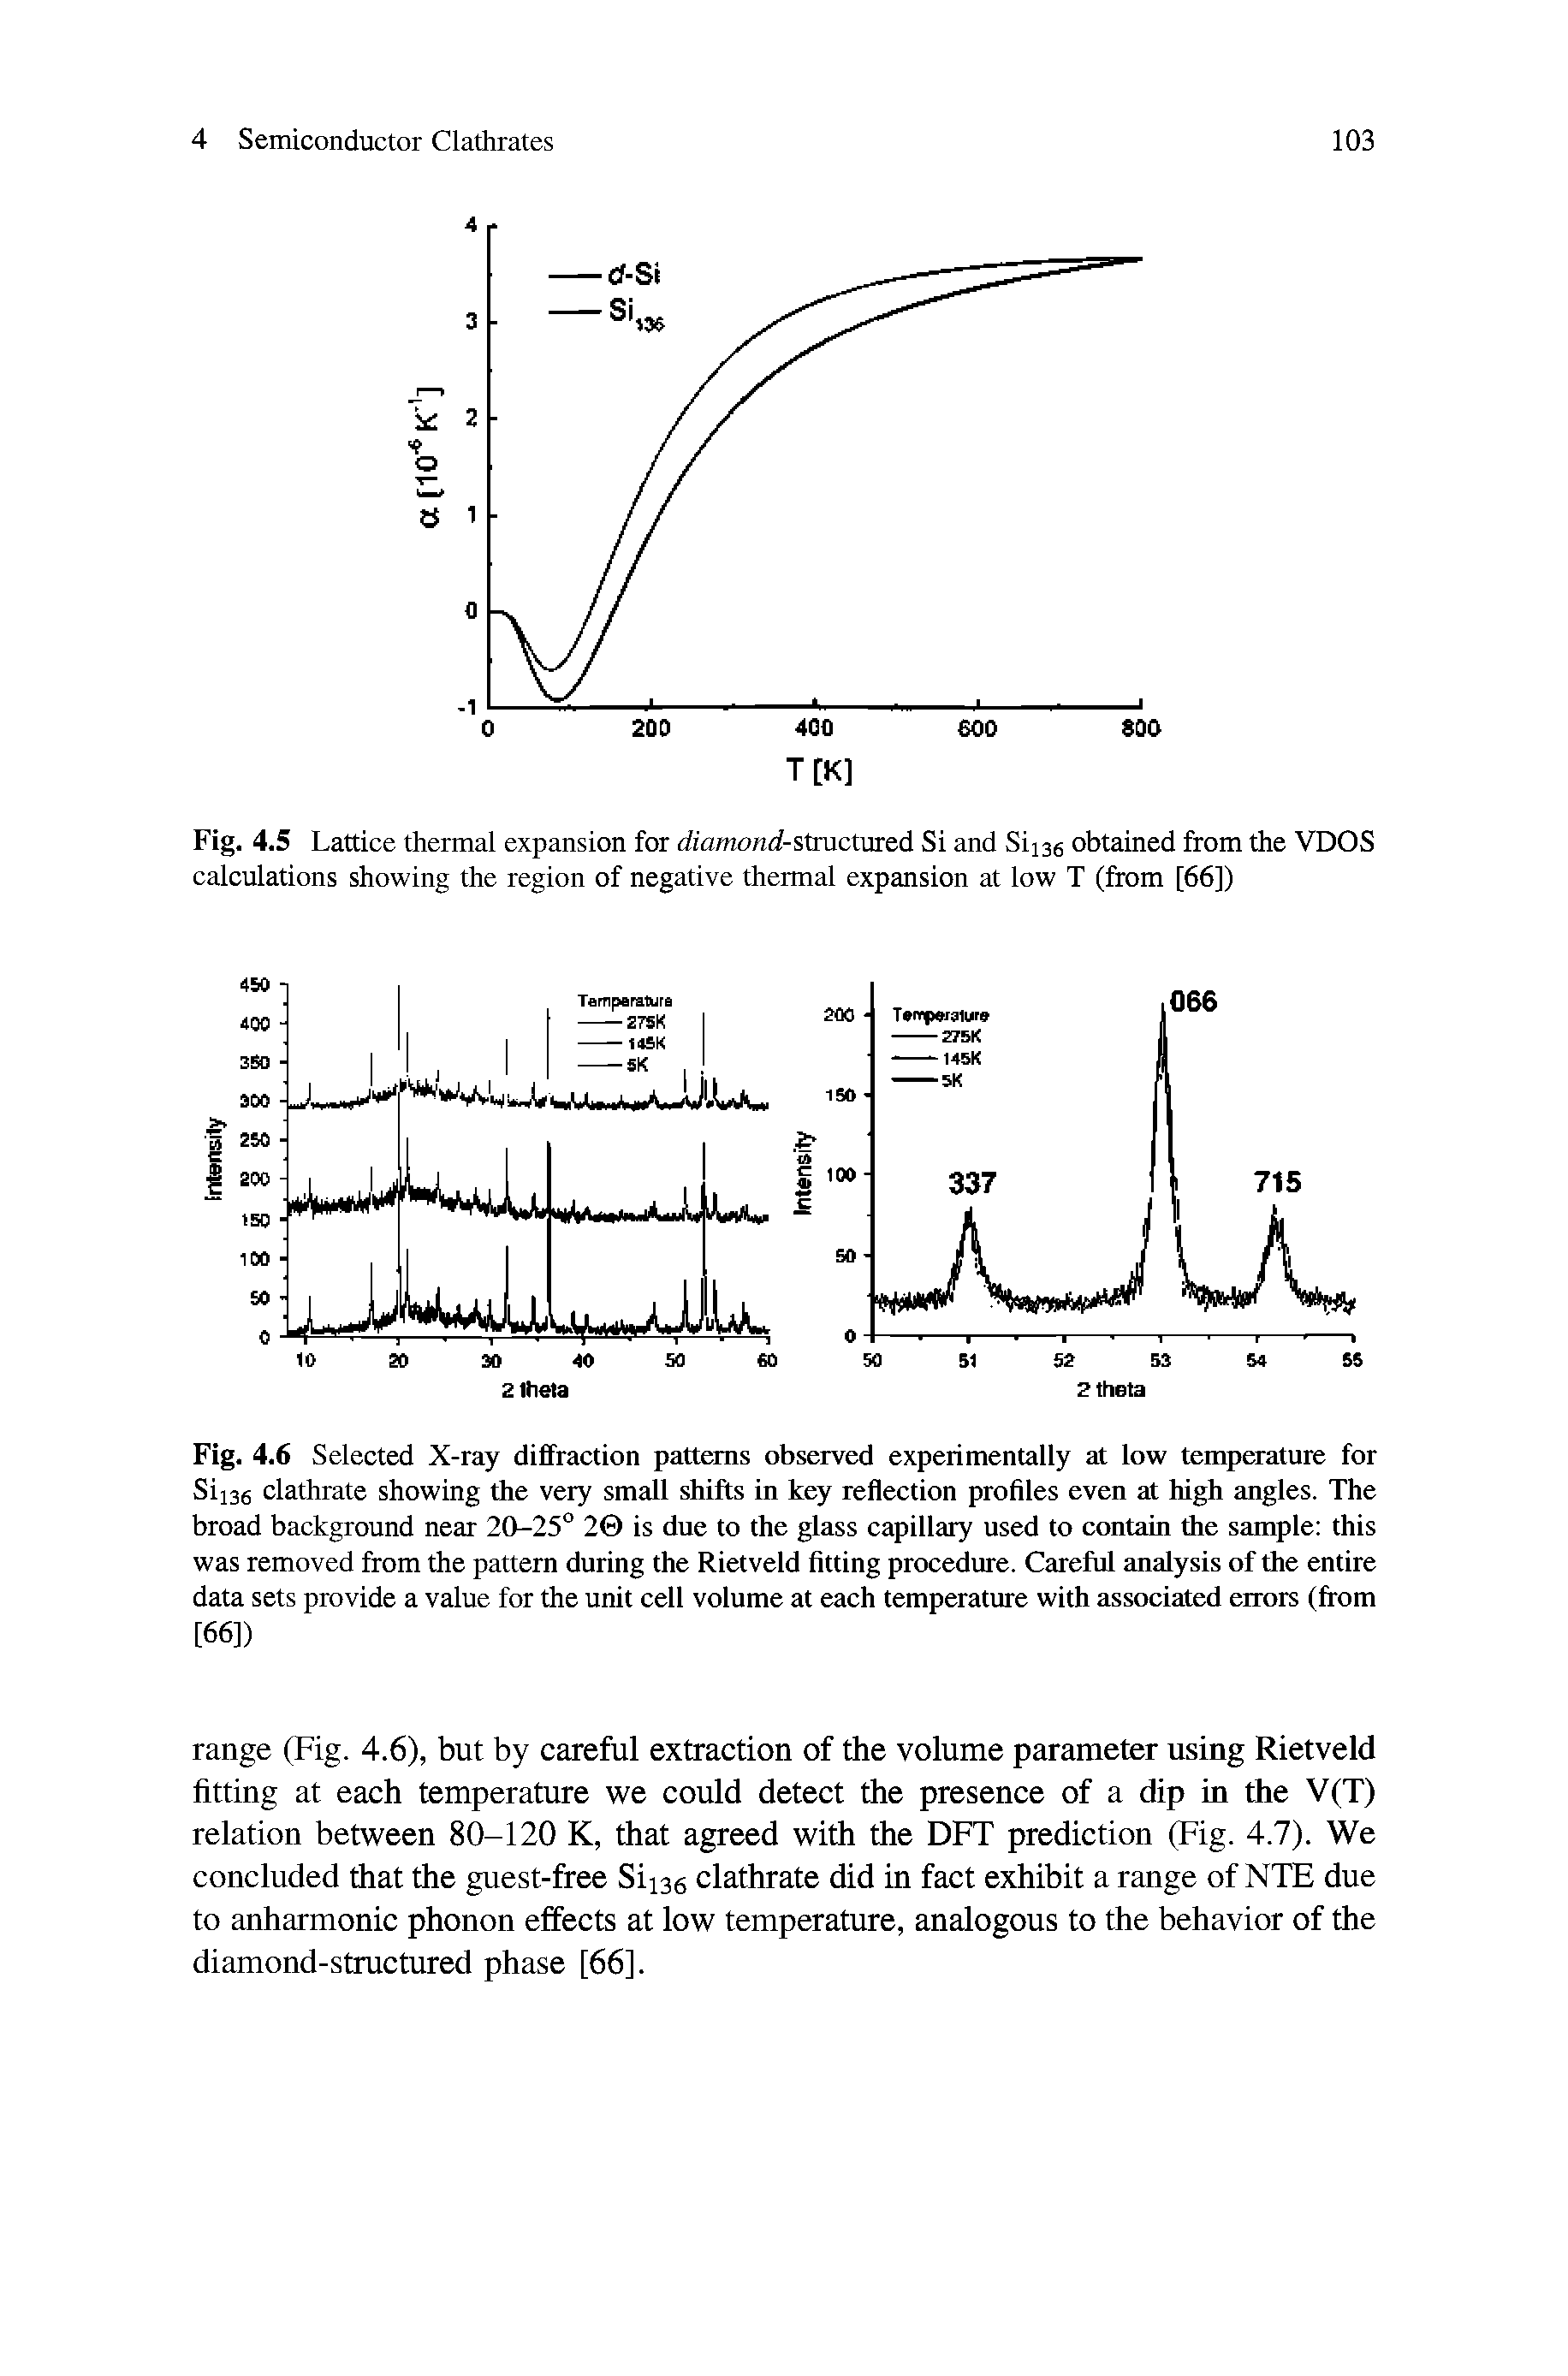 Fig. 4.6 Selected X-ray diffraction patterns observed experimentaiiy at iow temperature for Sii36 clathrate showing the very smaii shifts in key reflection profiies even at high angles. The broad background near 20-25° 2 is due to the glass capillary used to contain the sample this was removed from the pattern during the Rietveld fitting procedure. Careful analysis of the entire data sets provide a value for the unit cell volume at each temperature with associated errors (from [66])...